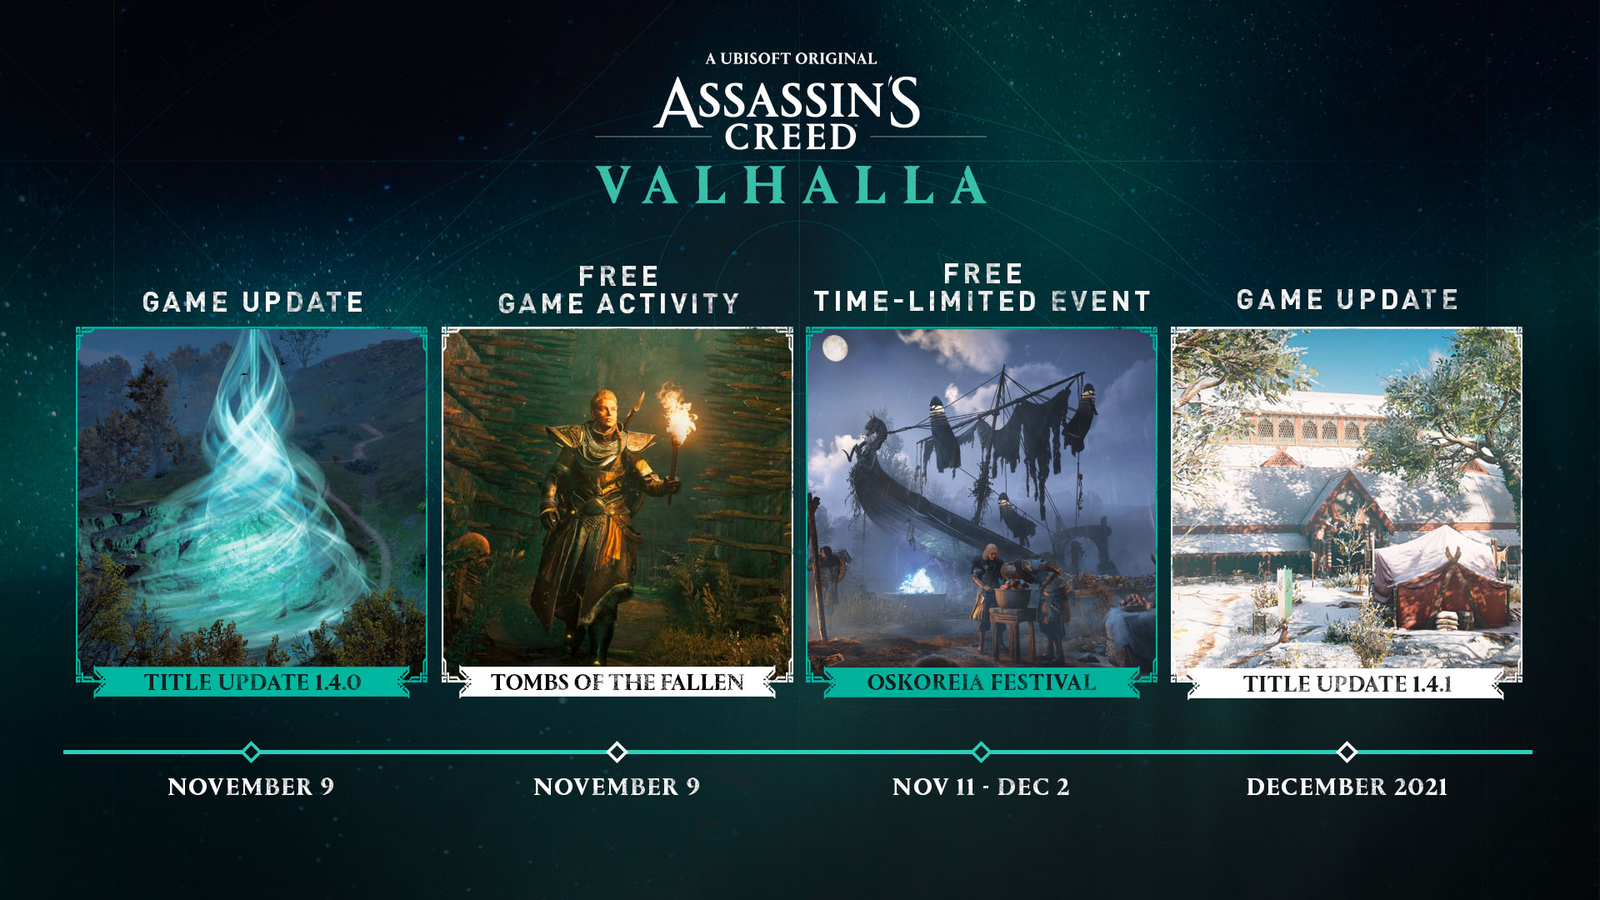 ASSASSIN'S CREED® VALHALLA: FINAL CONTENT UPDATE OVERVIEW